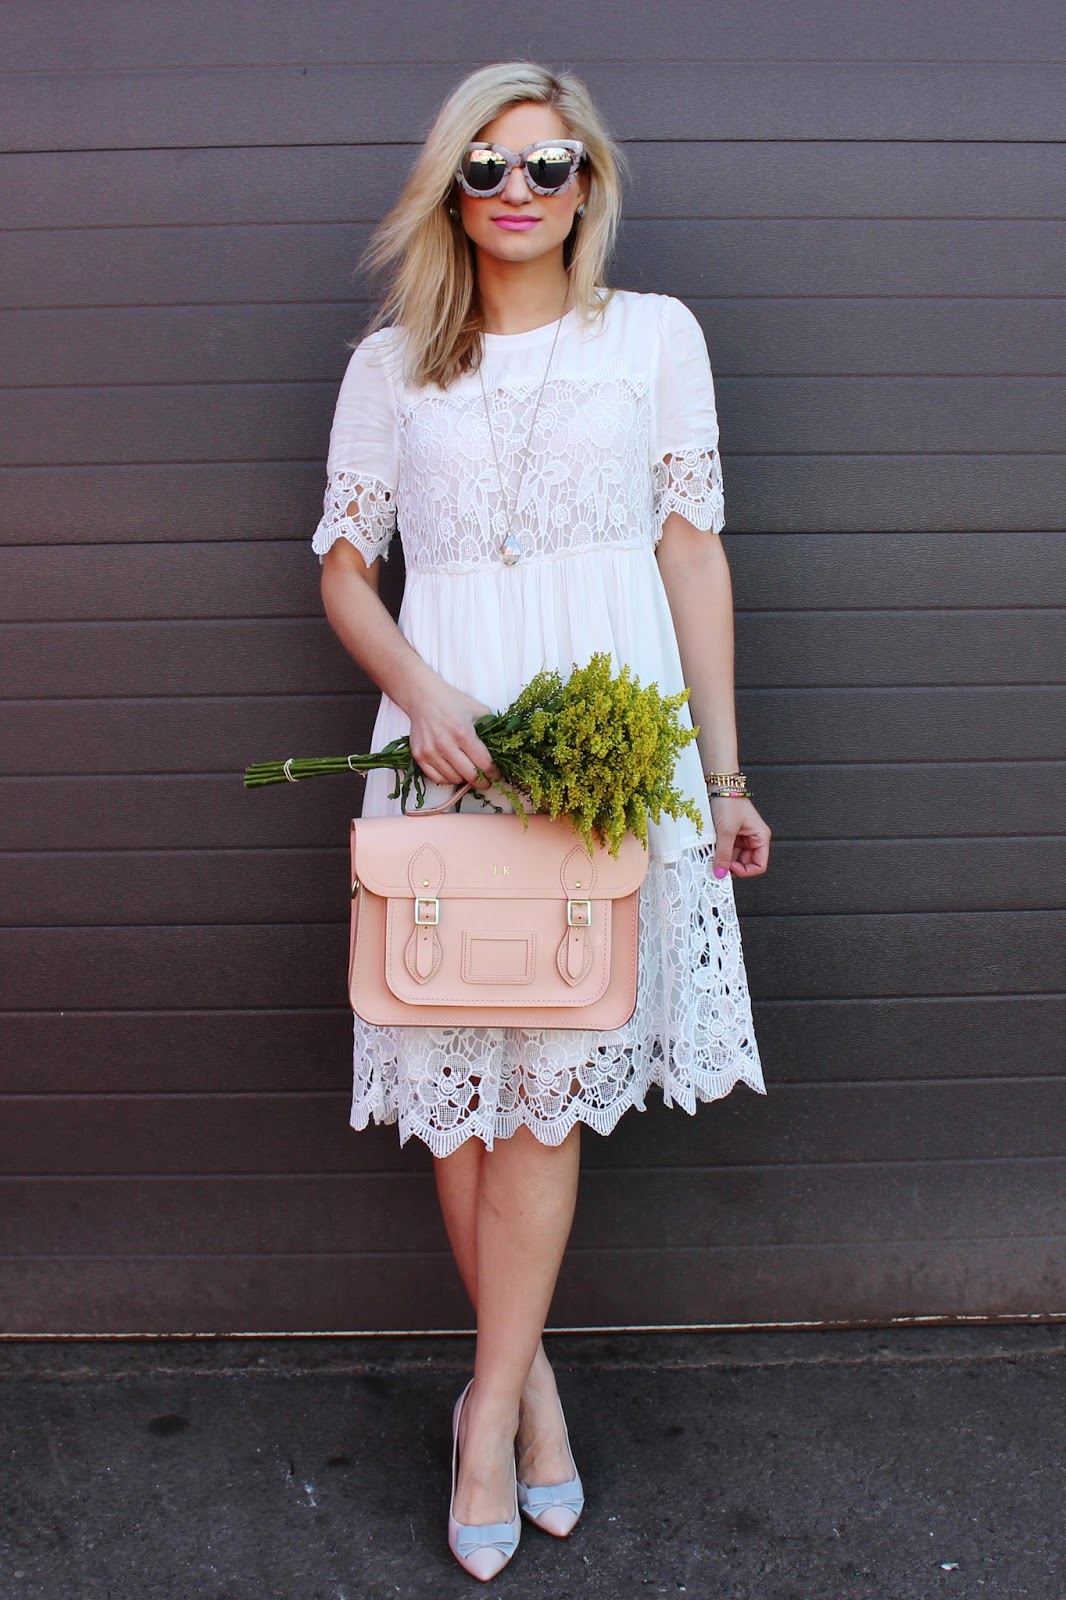 bijuleni-ethereal white lace dress and bow heels